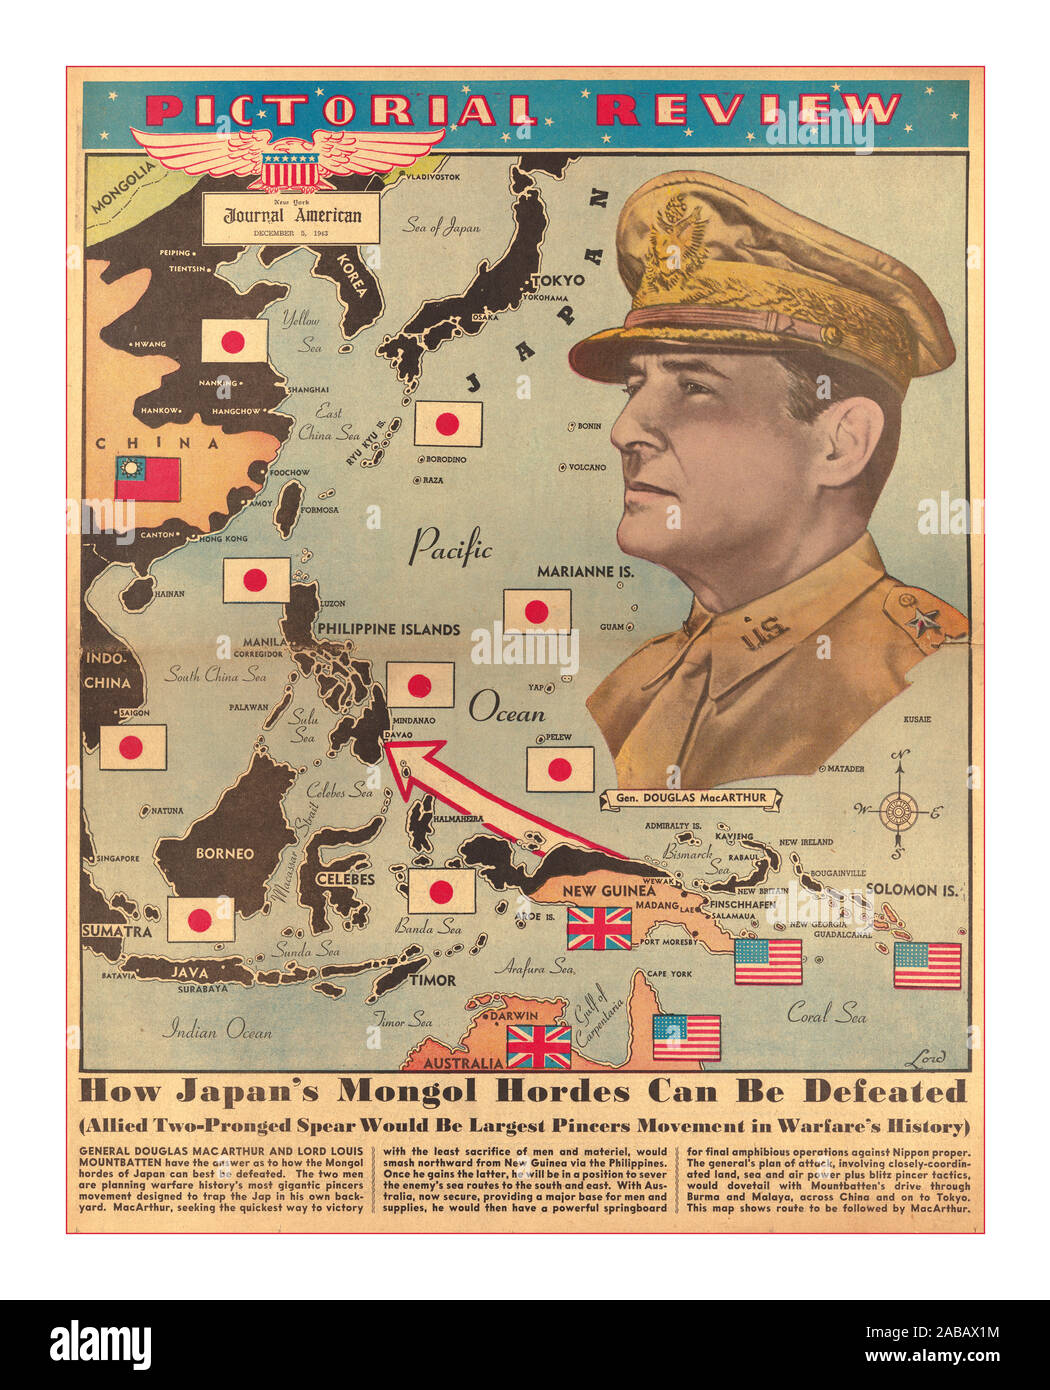 1940's World War 2 morale-building, full-page Sunday supplement map in color, showing how 'Japan's Mongol Hordes' would be 'Defeated' by 'the Largest Pincers Movement in Warfare's History.' The image is dominated by a heroic portrait of General MacArthur, larger than most of South Asia. New York Journal American, Pictorial Review, December 5, 1943. Stock Photo